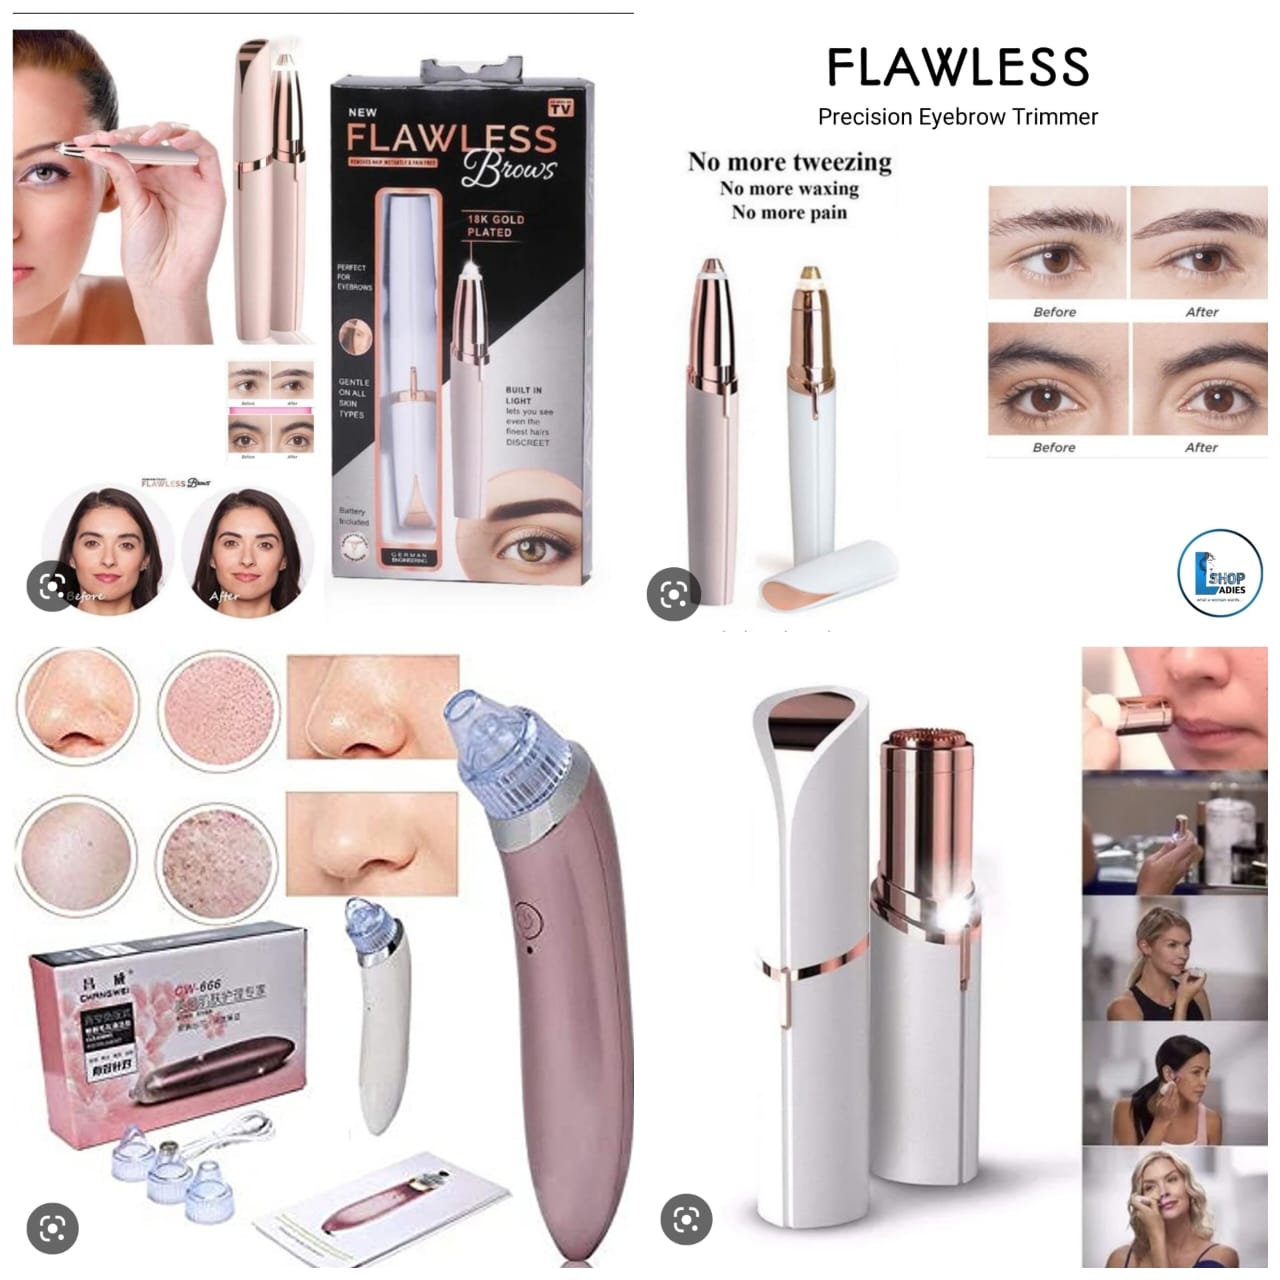 Acne Pore Vacuum Cleaner | Flawless Brows | Flawless Painless Hair Remover (3 items deal)